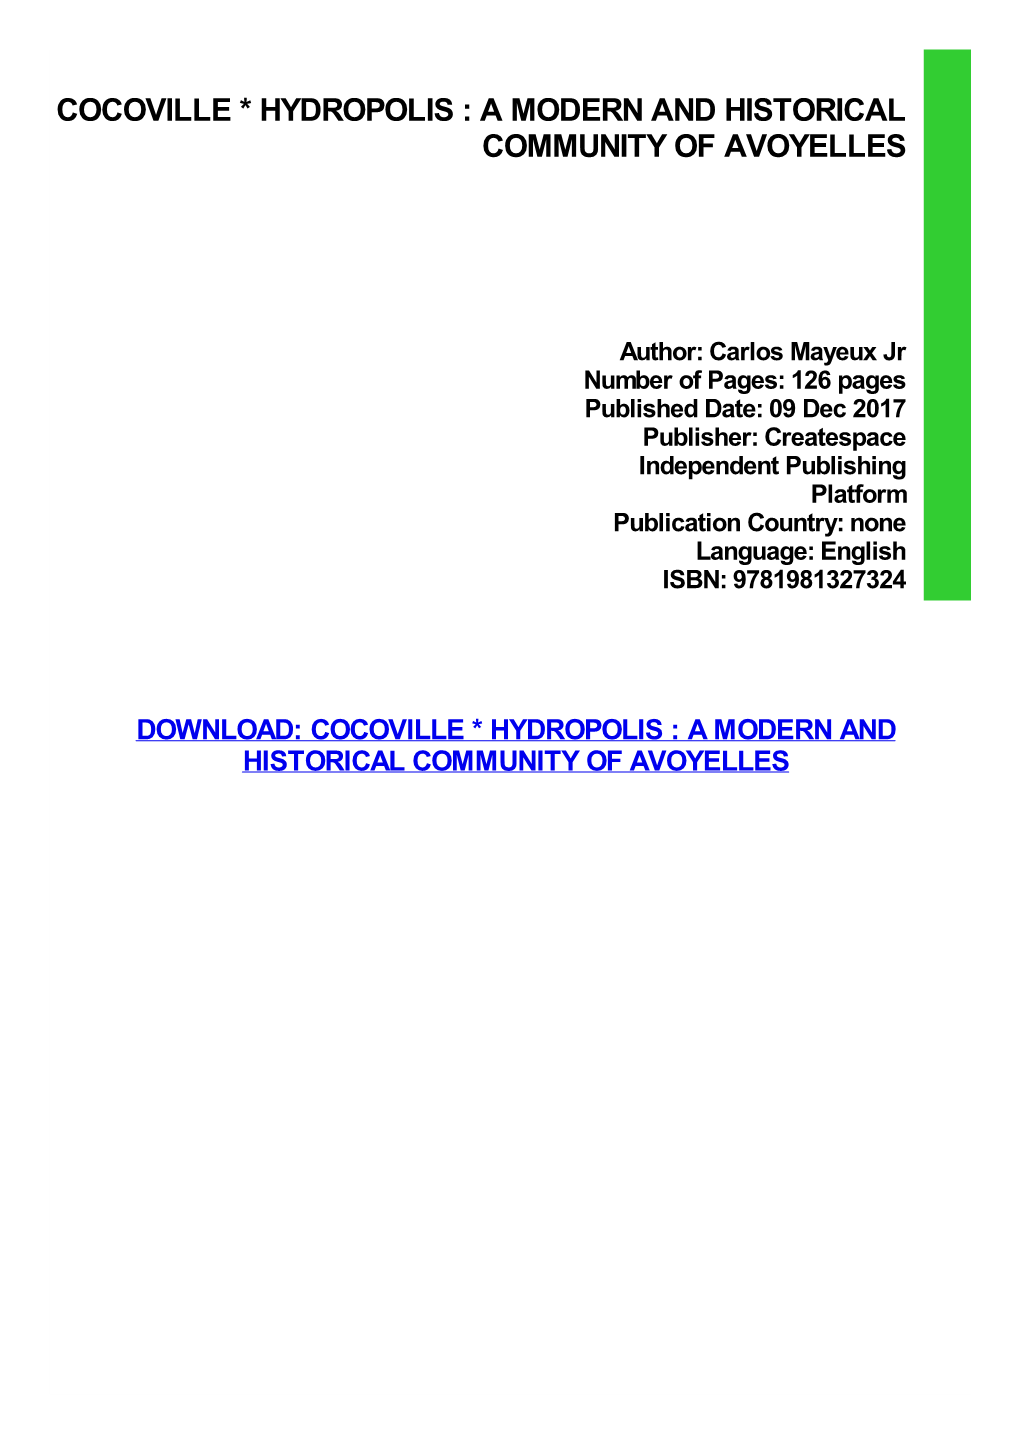 Cocoville * Hydropolis : a Modern and Historical Community of Avoyelles